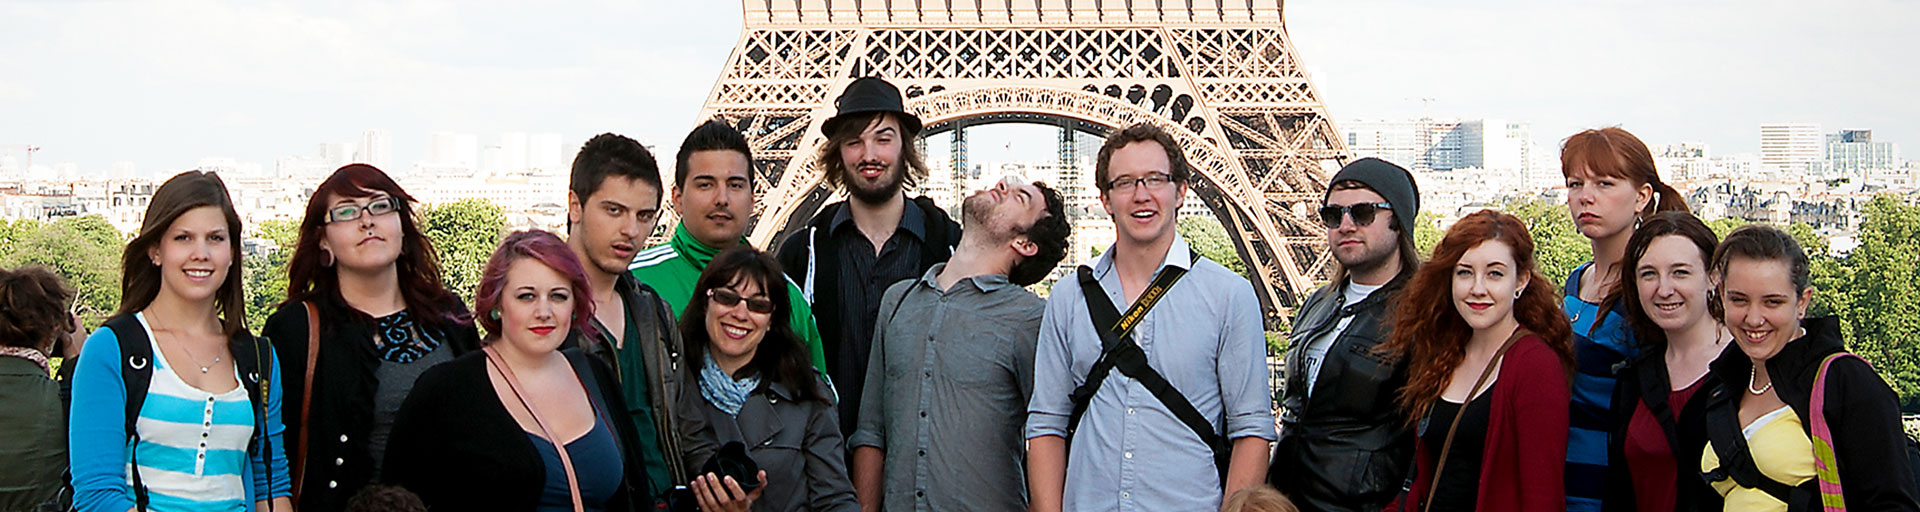 students posing in front of the Eiffel Tower